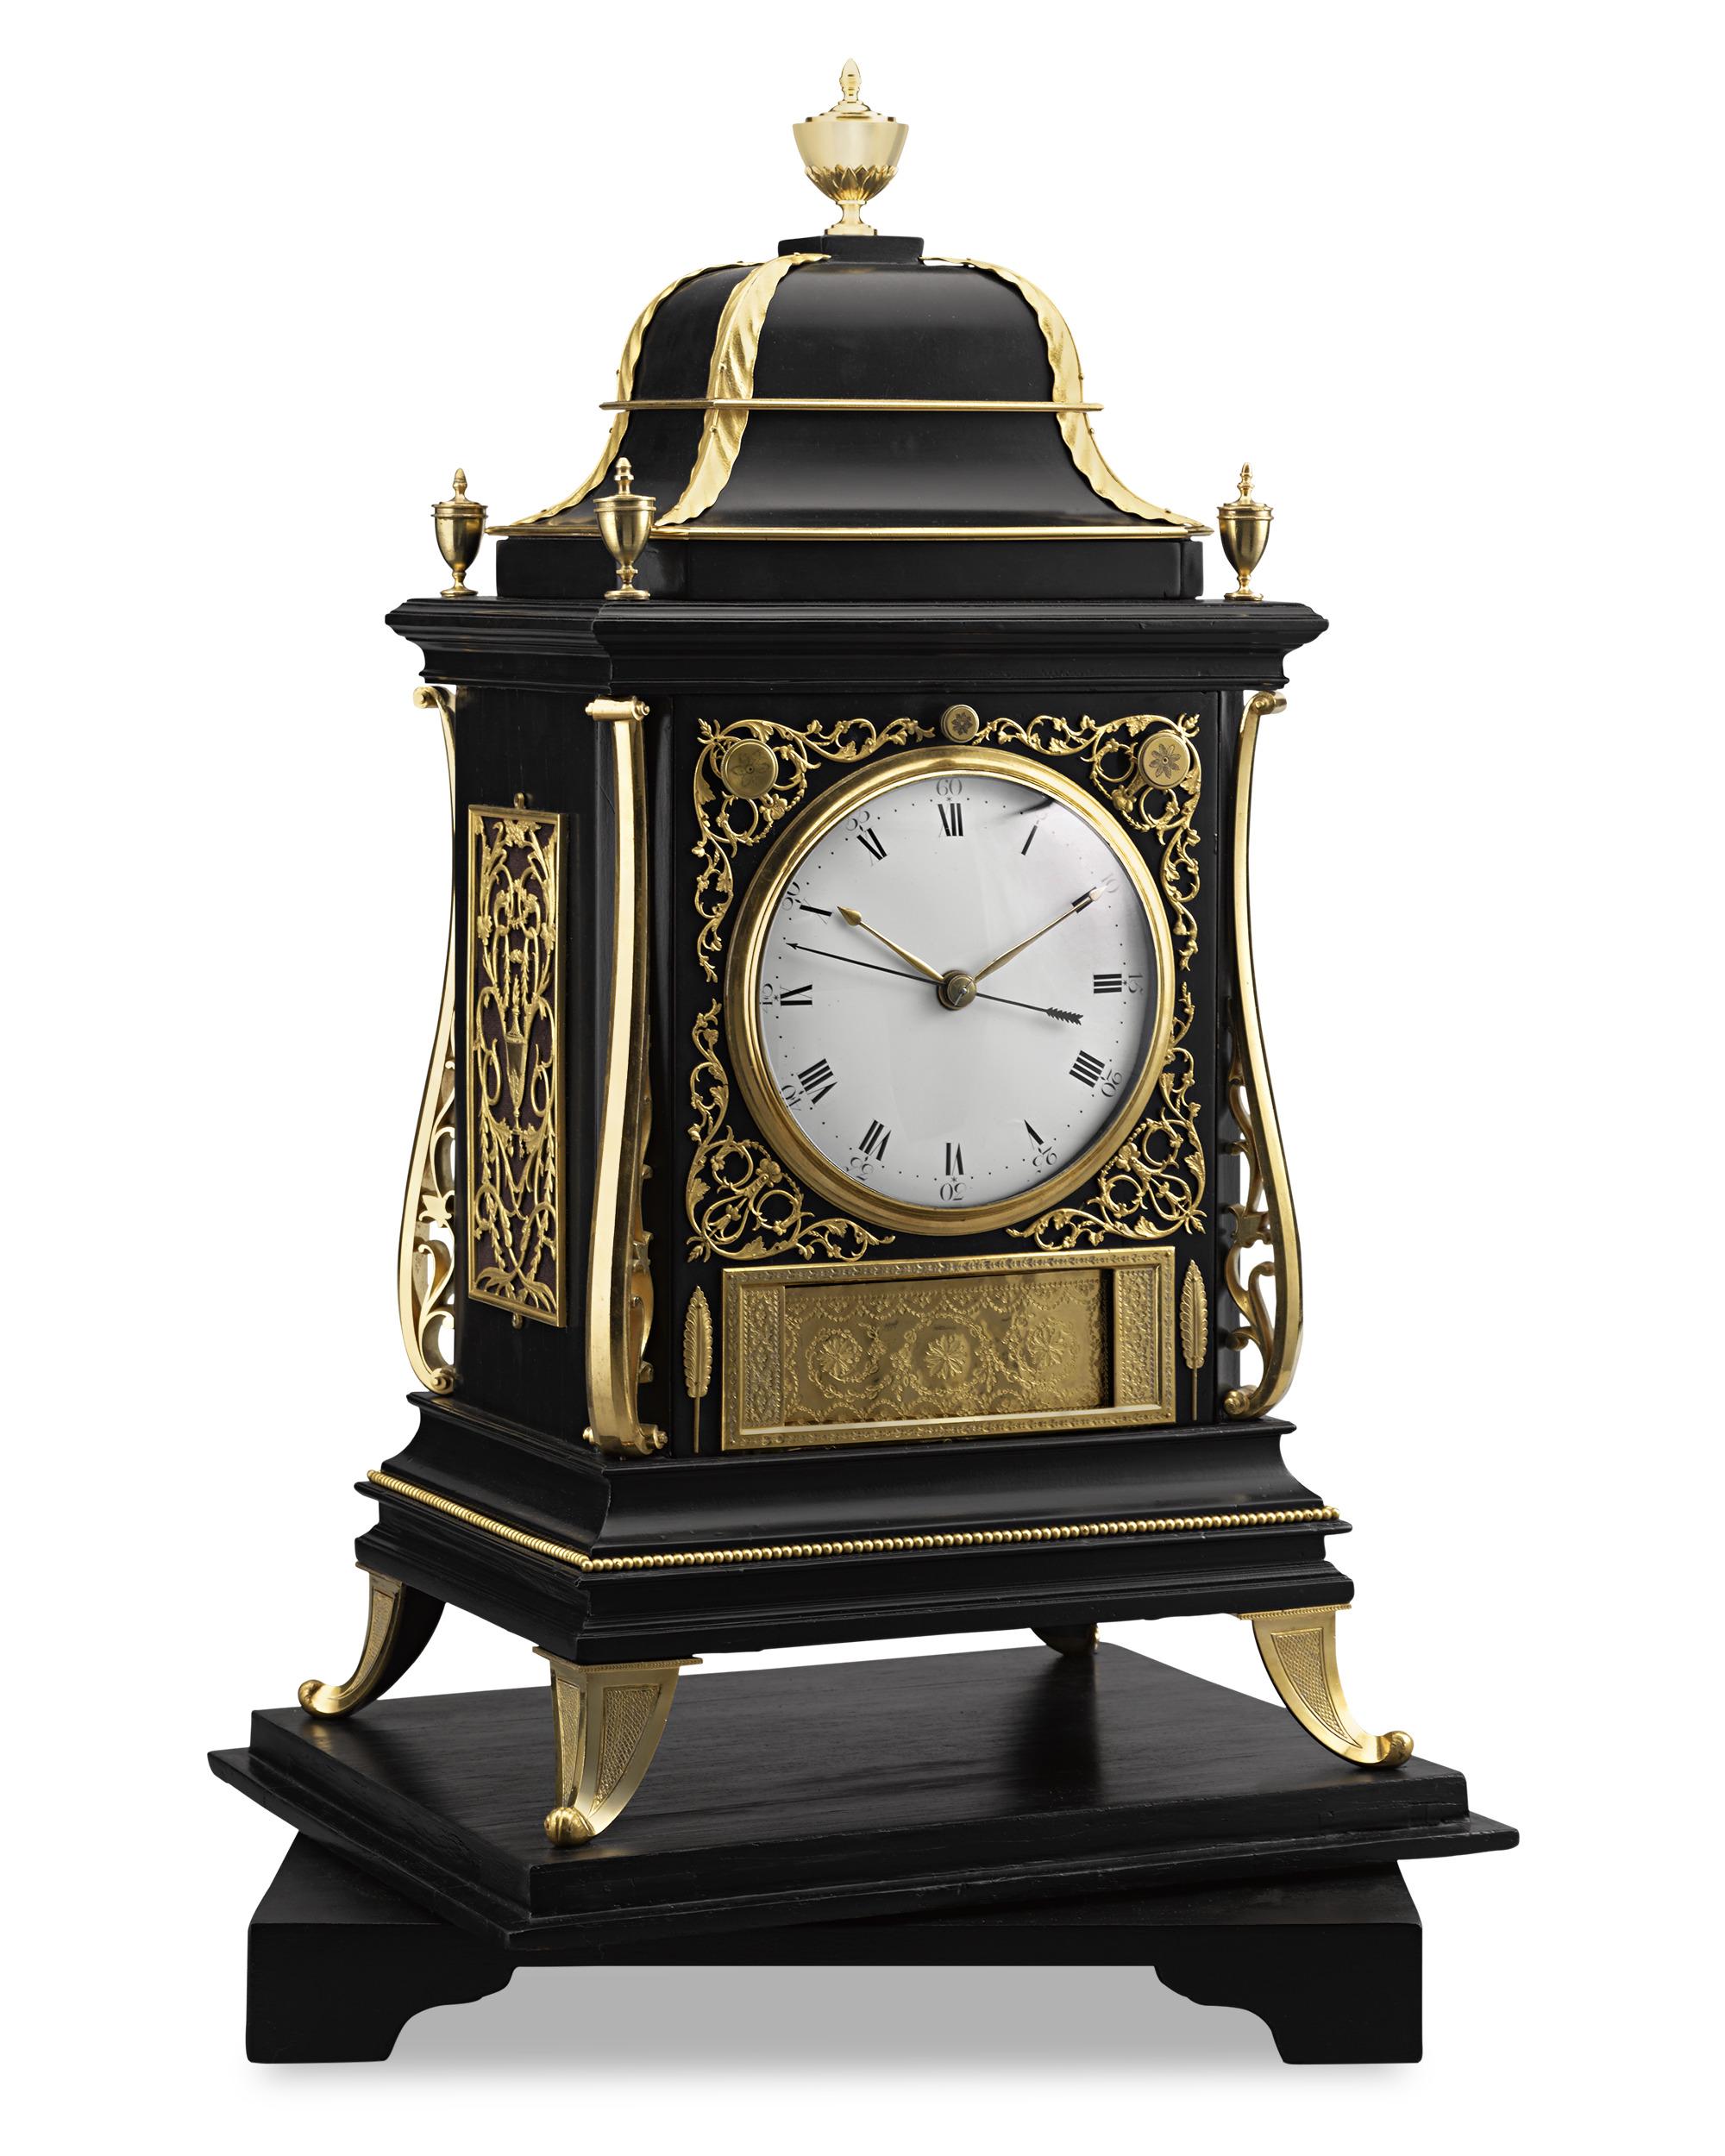 This exceptional three-train chain fusee musical diorama clock is a horological, mechanical and artistic masterpiece. When melodic bells strike the hour, a brass curtain below the dial opens, and music plays to reveal a detailed diorama of ships